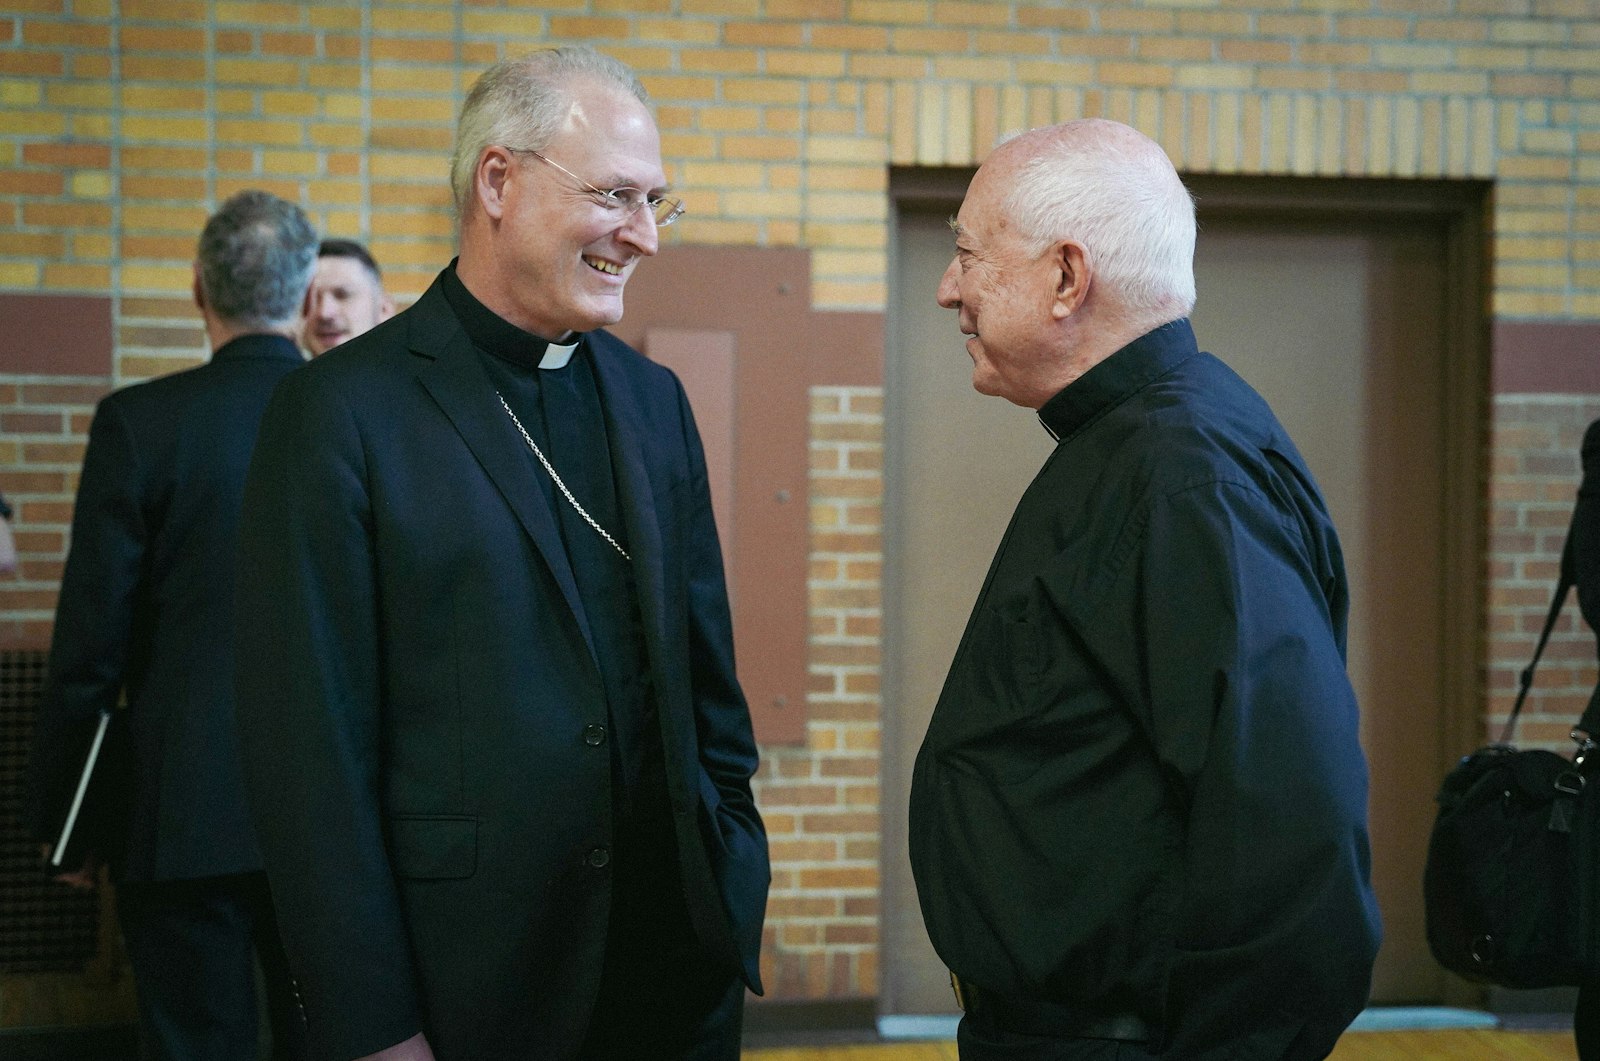 Archbishop Paul F. Russell, left, talks with Fr. Ed Zaorski, pastor of St. James Parish in Novi, during a meet-and-greet with members of the Detroit presbyterate May 23. Archbishop Russell and Fr. Zaorski have known each other since they were both teenagers working for the Archdiocese of Detroit's CYO camp in Port Sanilac. (Valaurian Waller | Detroit Catholic)